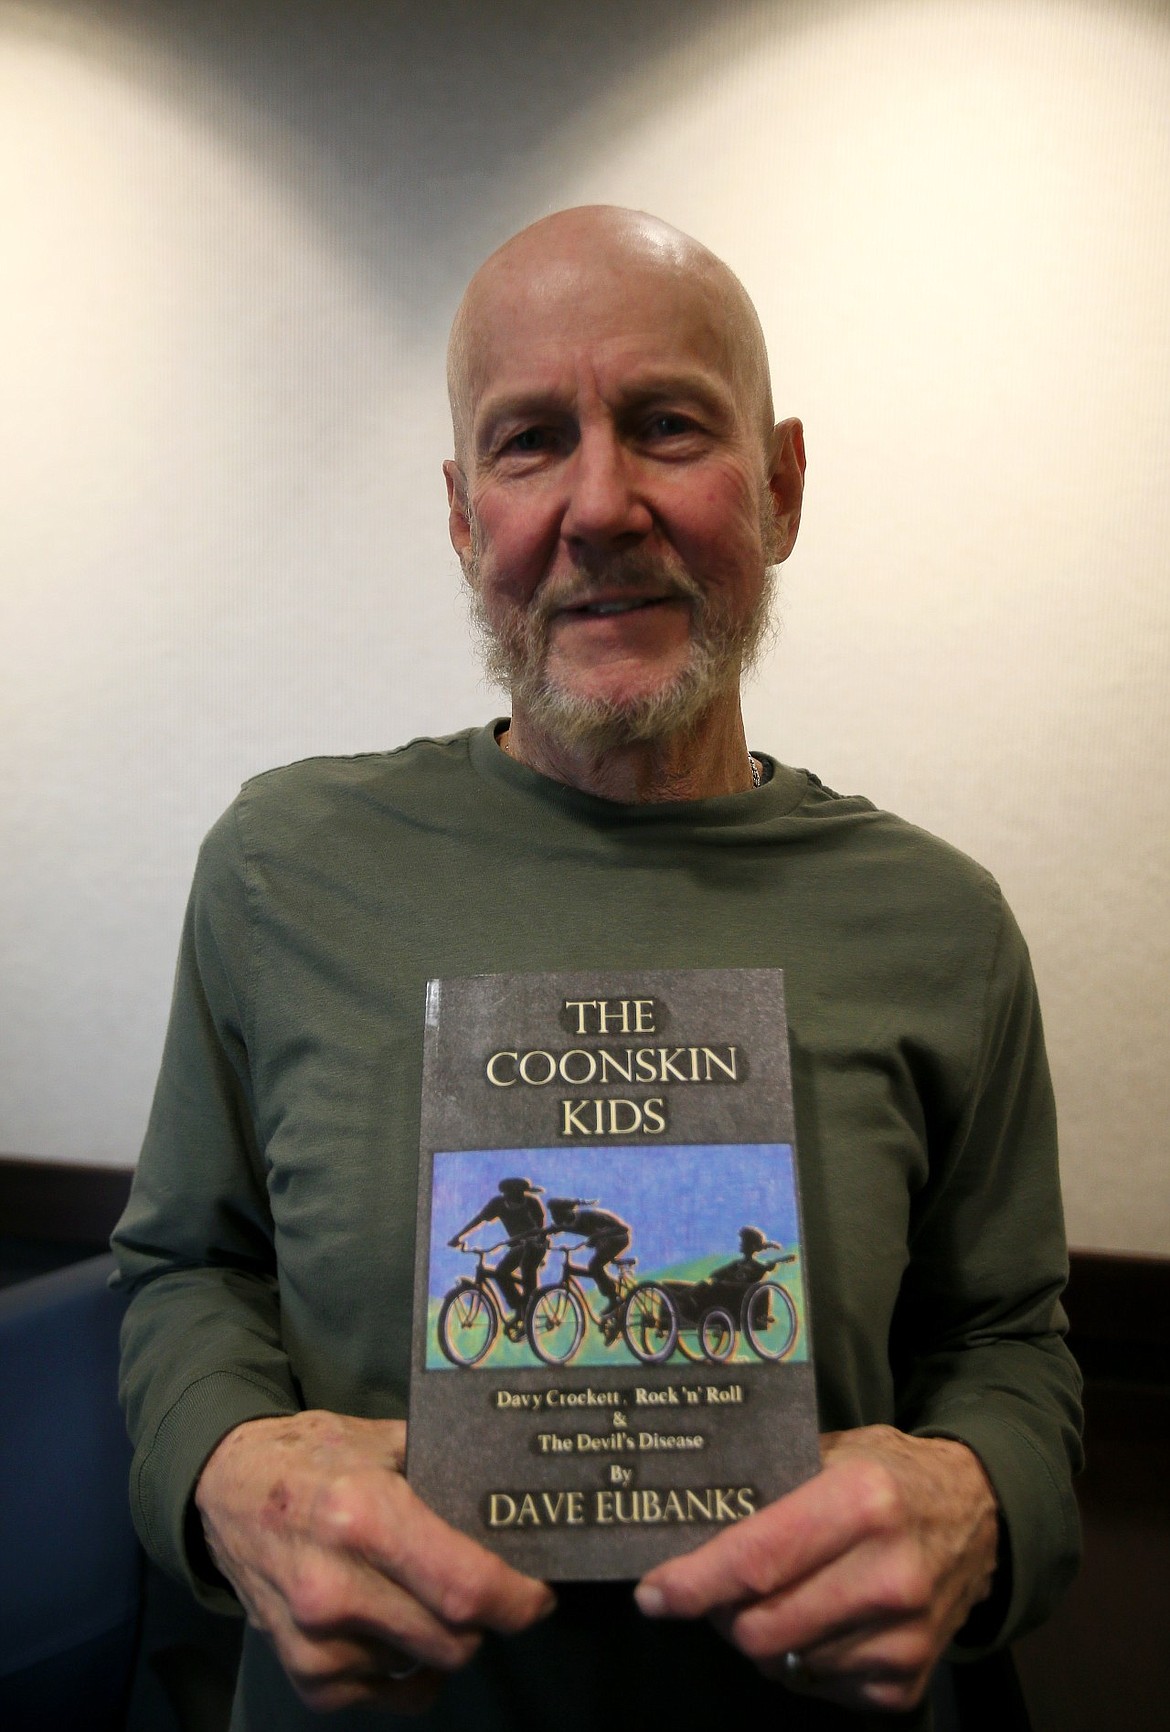 Retired longtime school teacher Dave Eubanks of Rathdrum has released his first book, "The Coonskin Kids: Davy Crockett, Rock 'n' Roll and the Devil's Disease," which he dedicated to the 400,000 or so kids who survived polio and to the 58,815 who didn't.